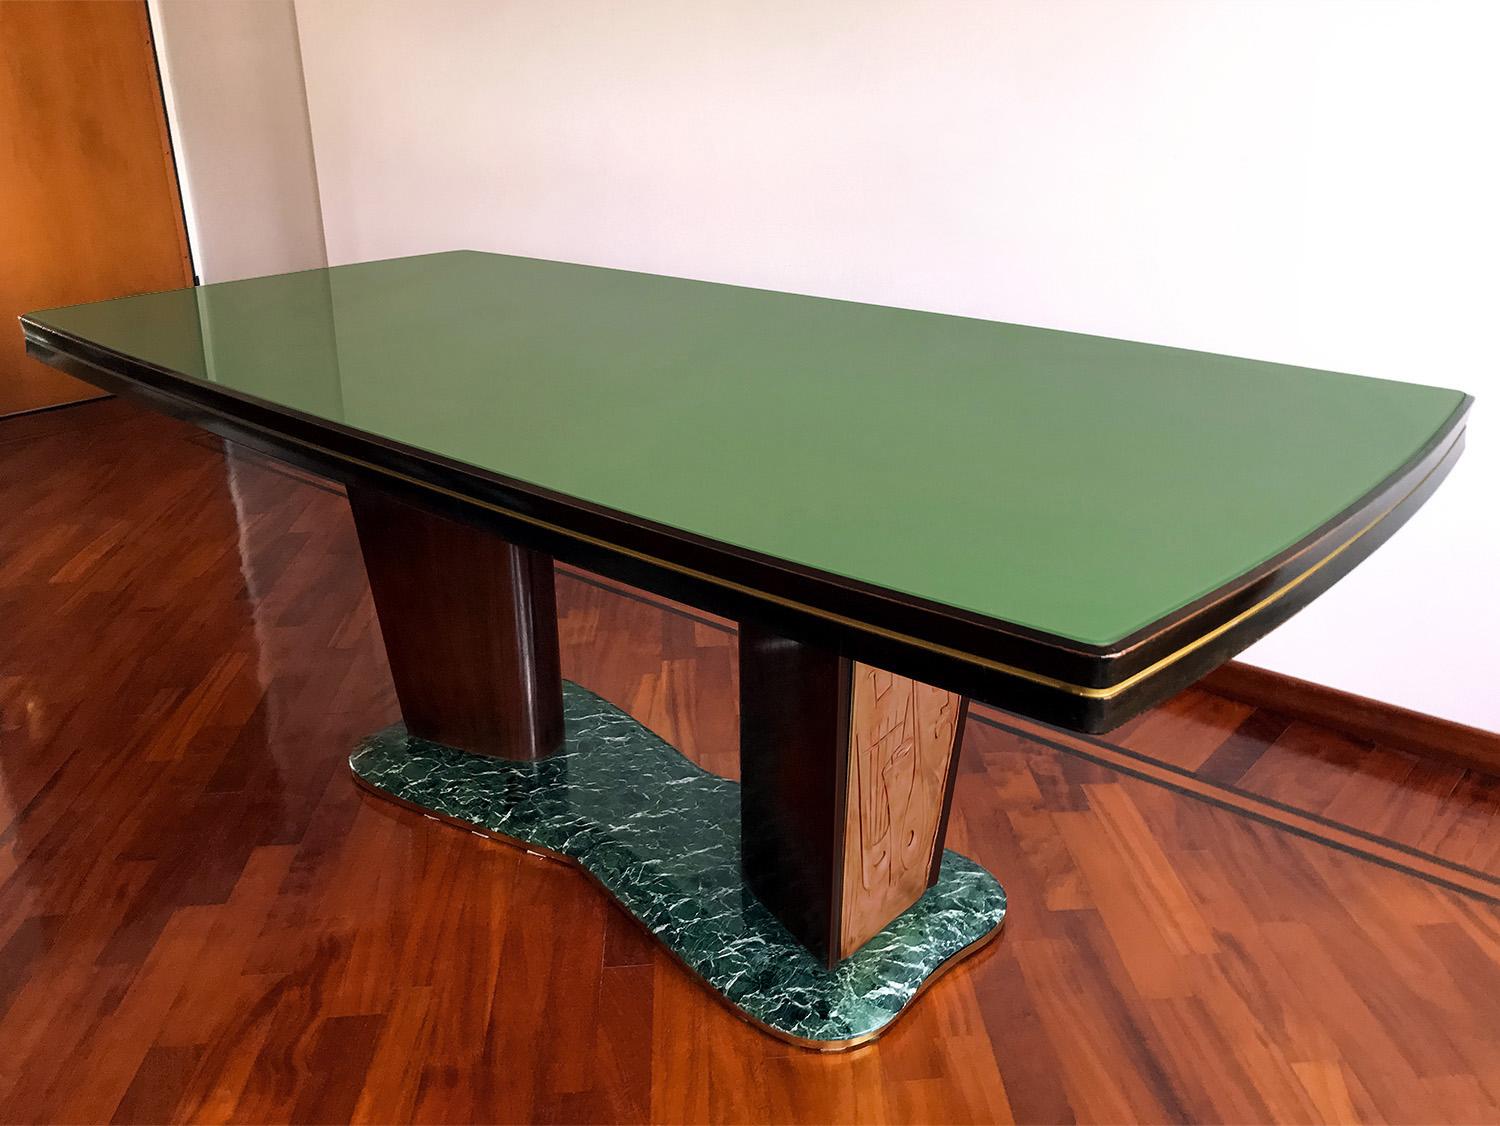 For your consideration this elegant dining table in Art Deco style, designed by Vittorio Dassi in the 1950s.
The top-table has a glass back-treated with green colored paper and is supported by two big legs fixed on a basement made of precious